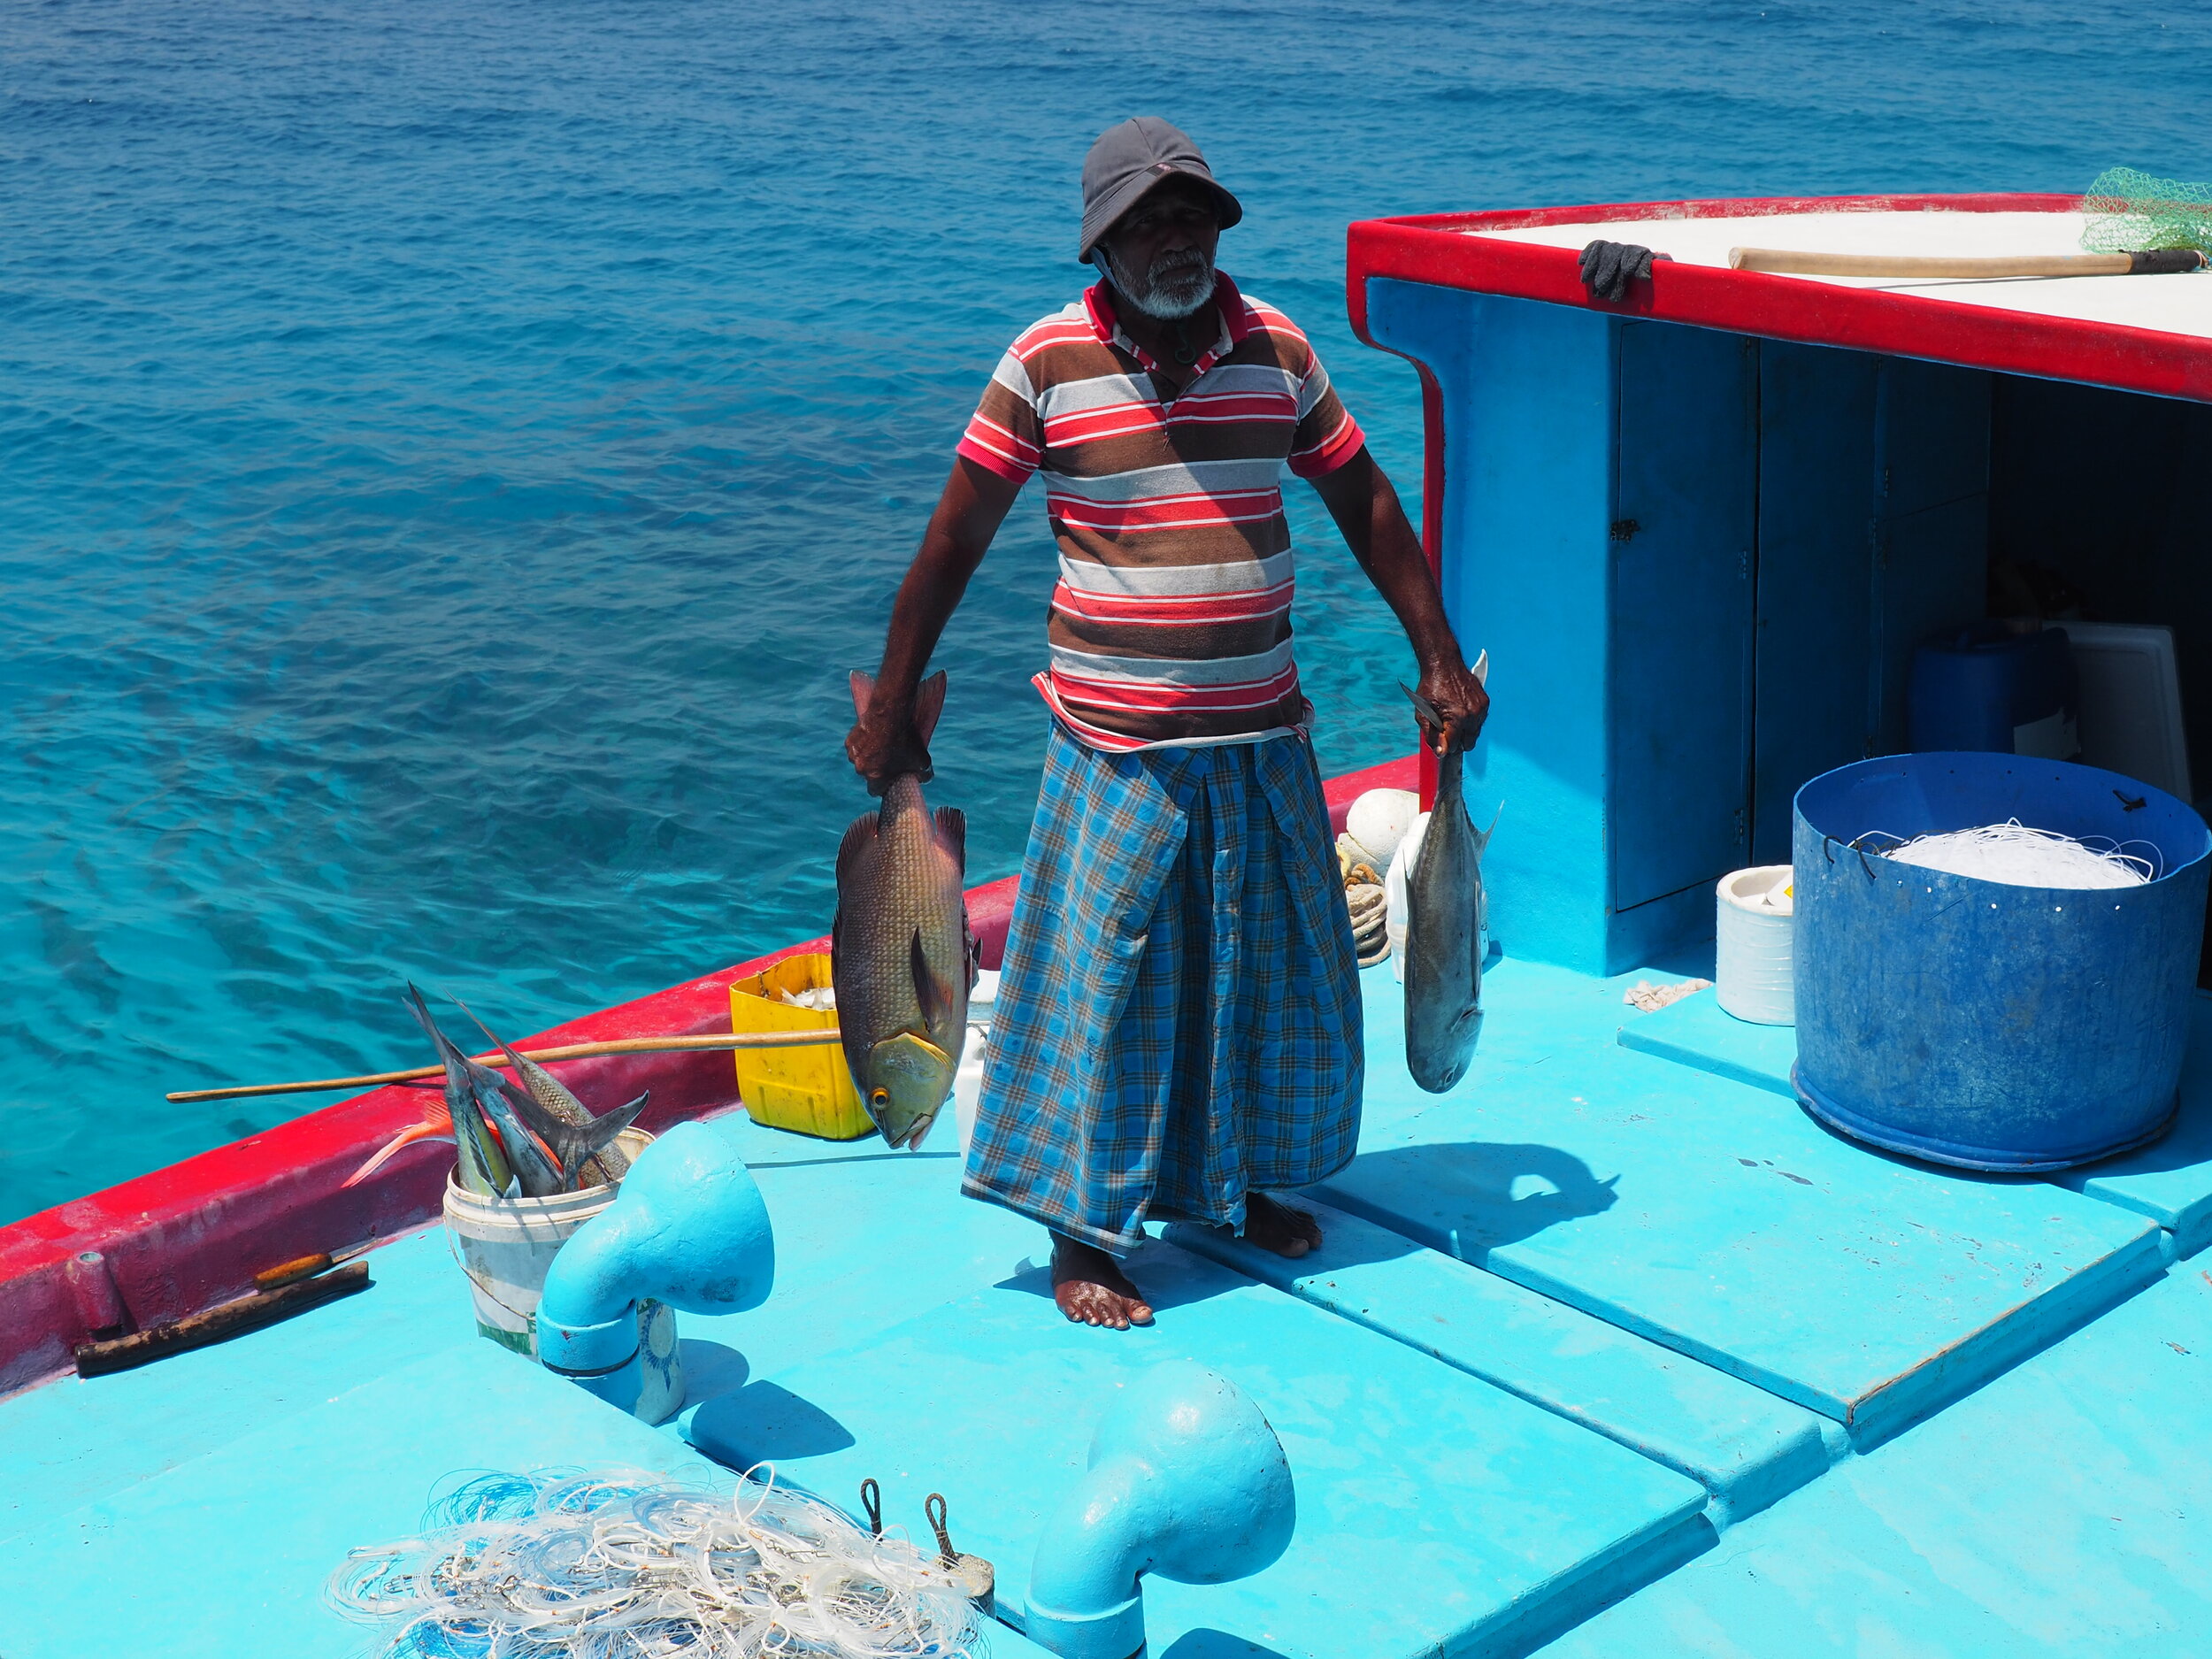 SMALL-SCALE FISHERIES MANAGEMENT